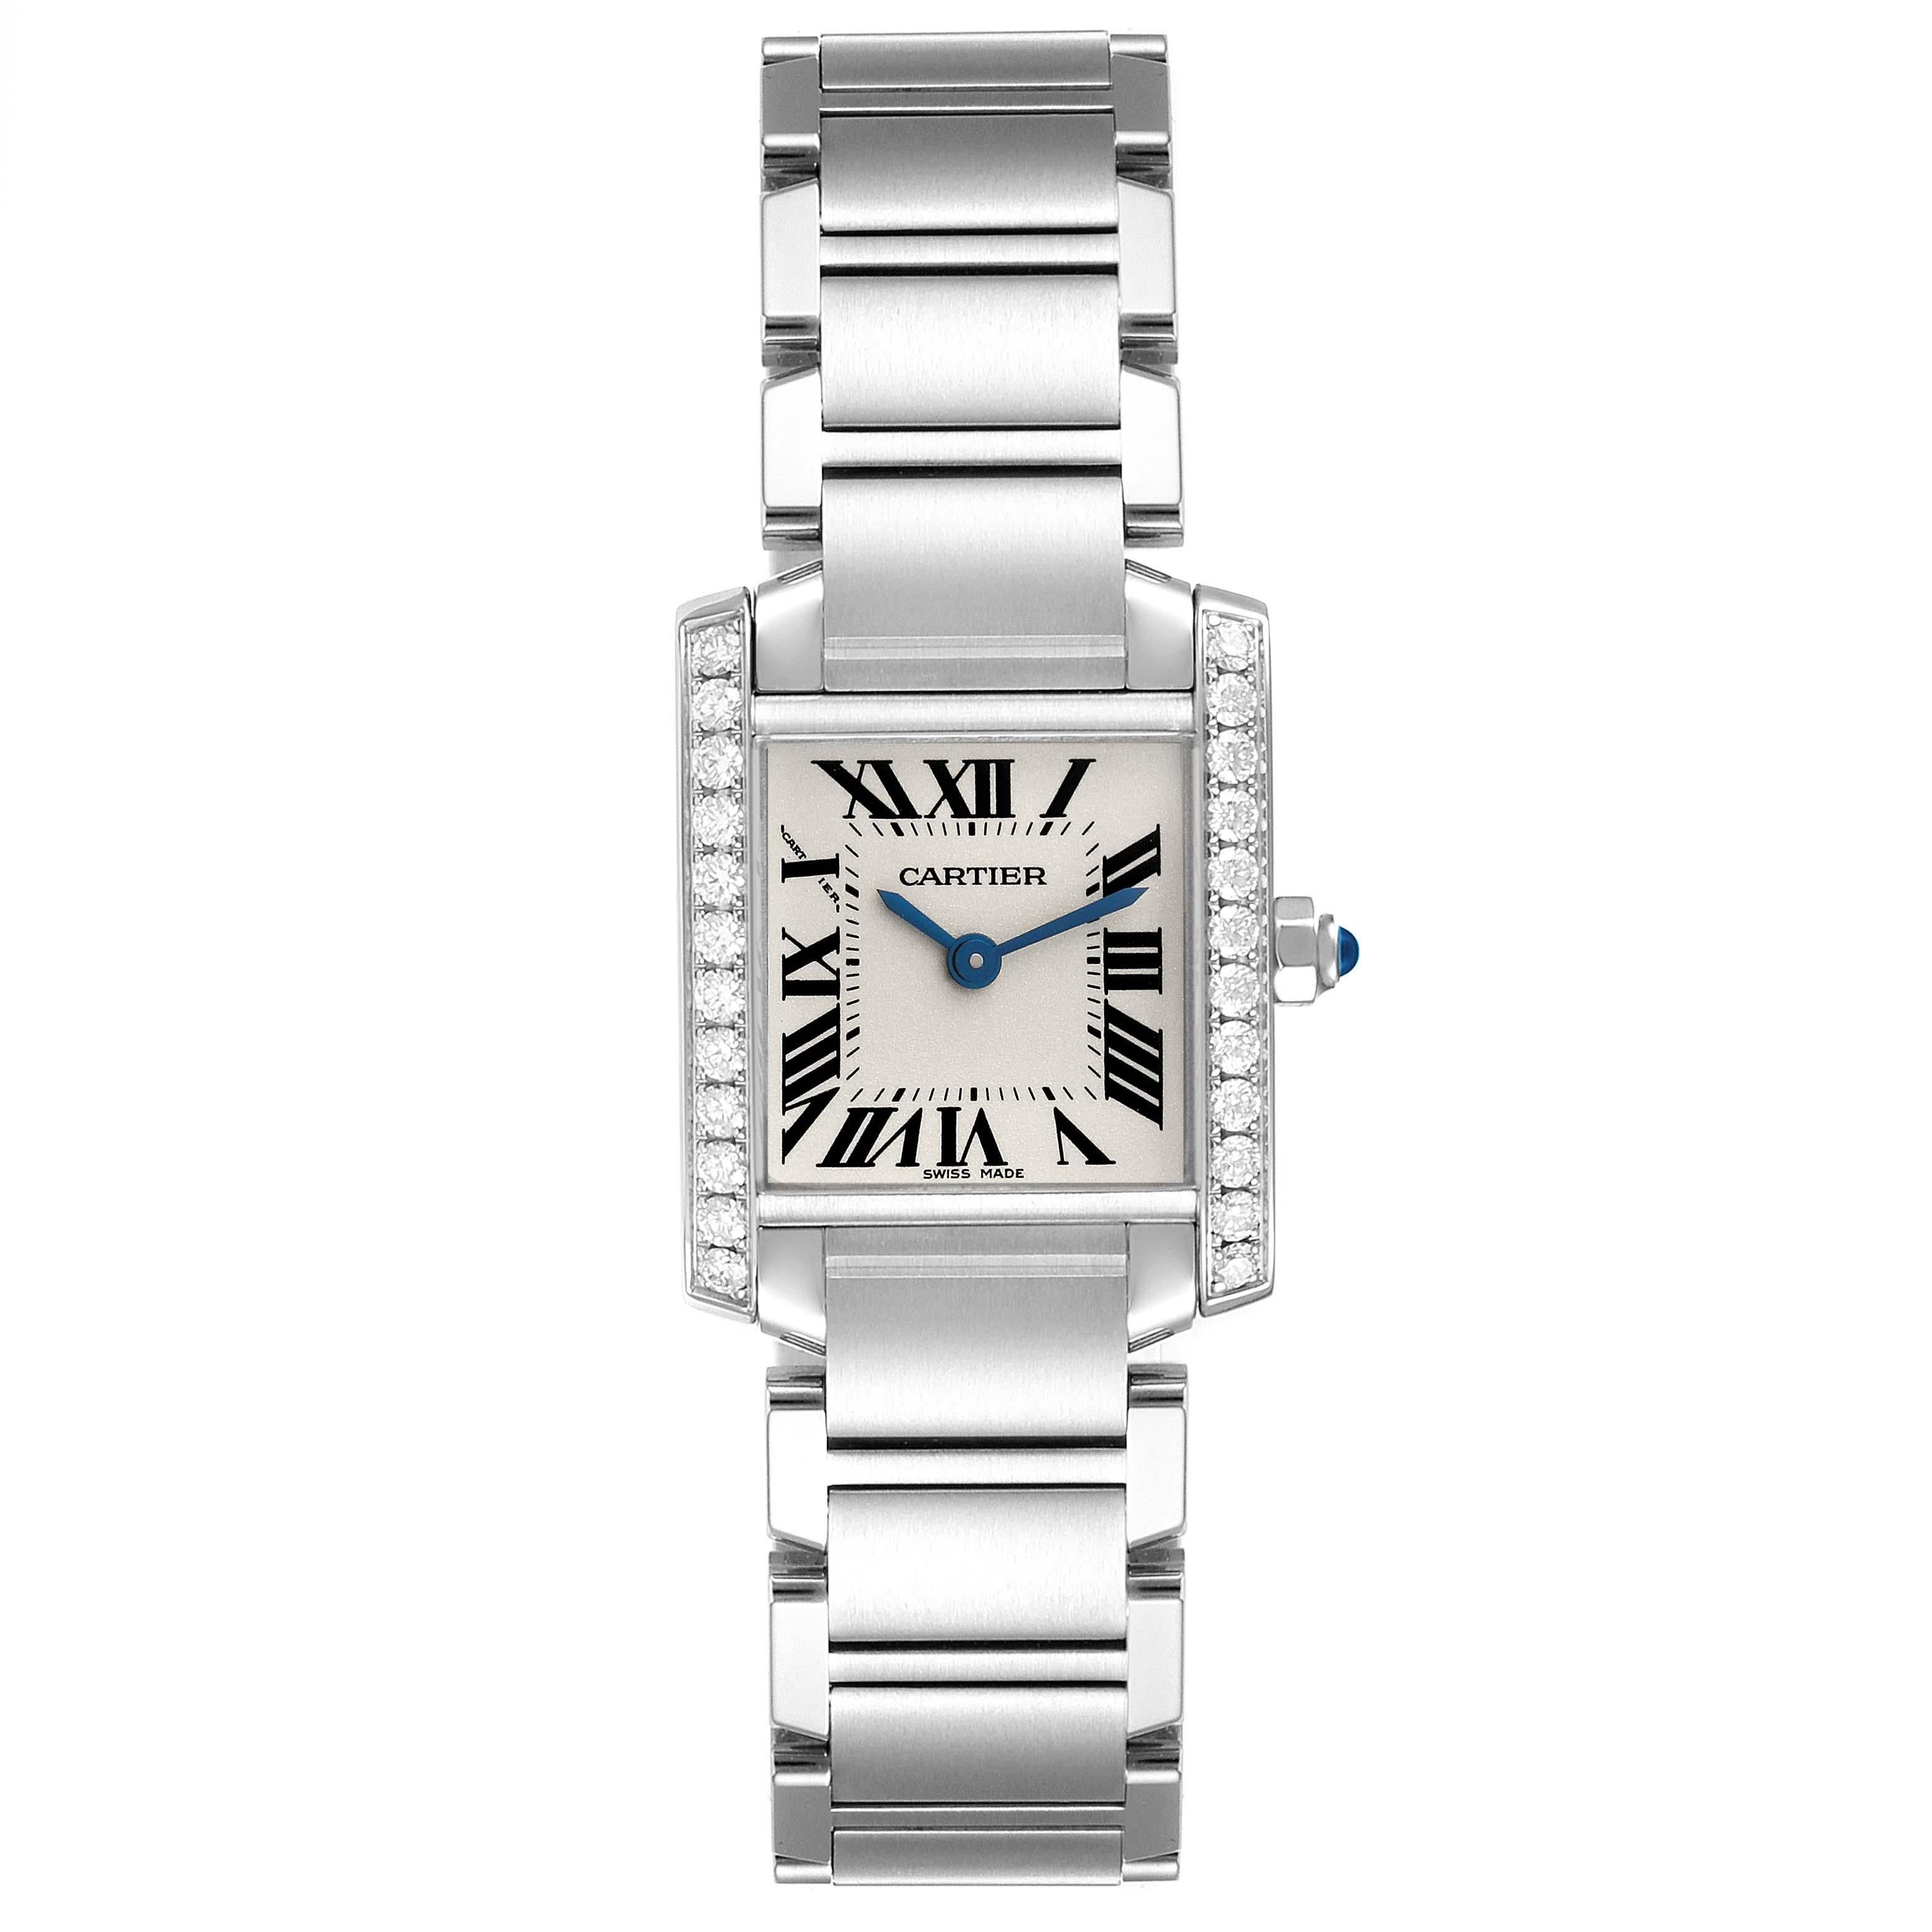 Cartier Tank Francaise Small Steel Diamond Bezel Ladies Watch W4TA0008 Box Card In Excellent Condition For Sale In Atlanta, GA